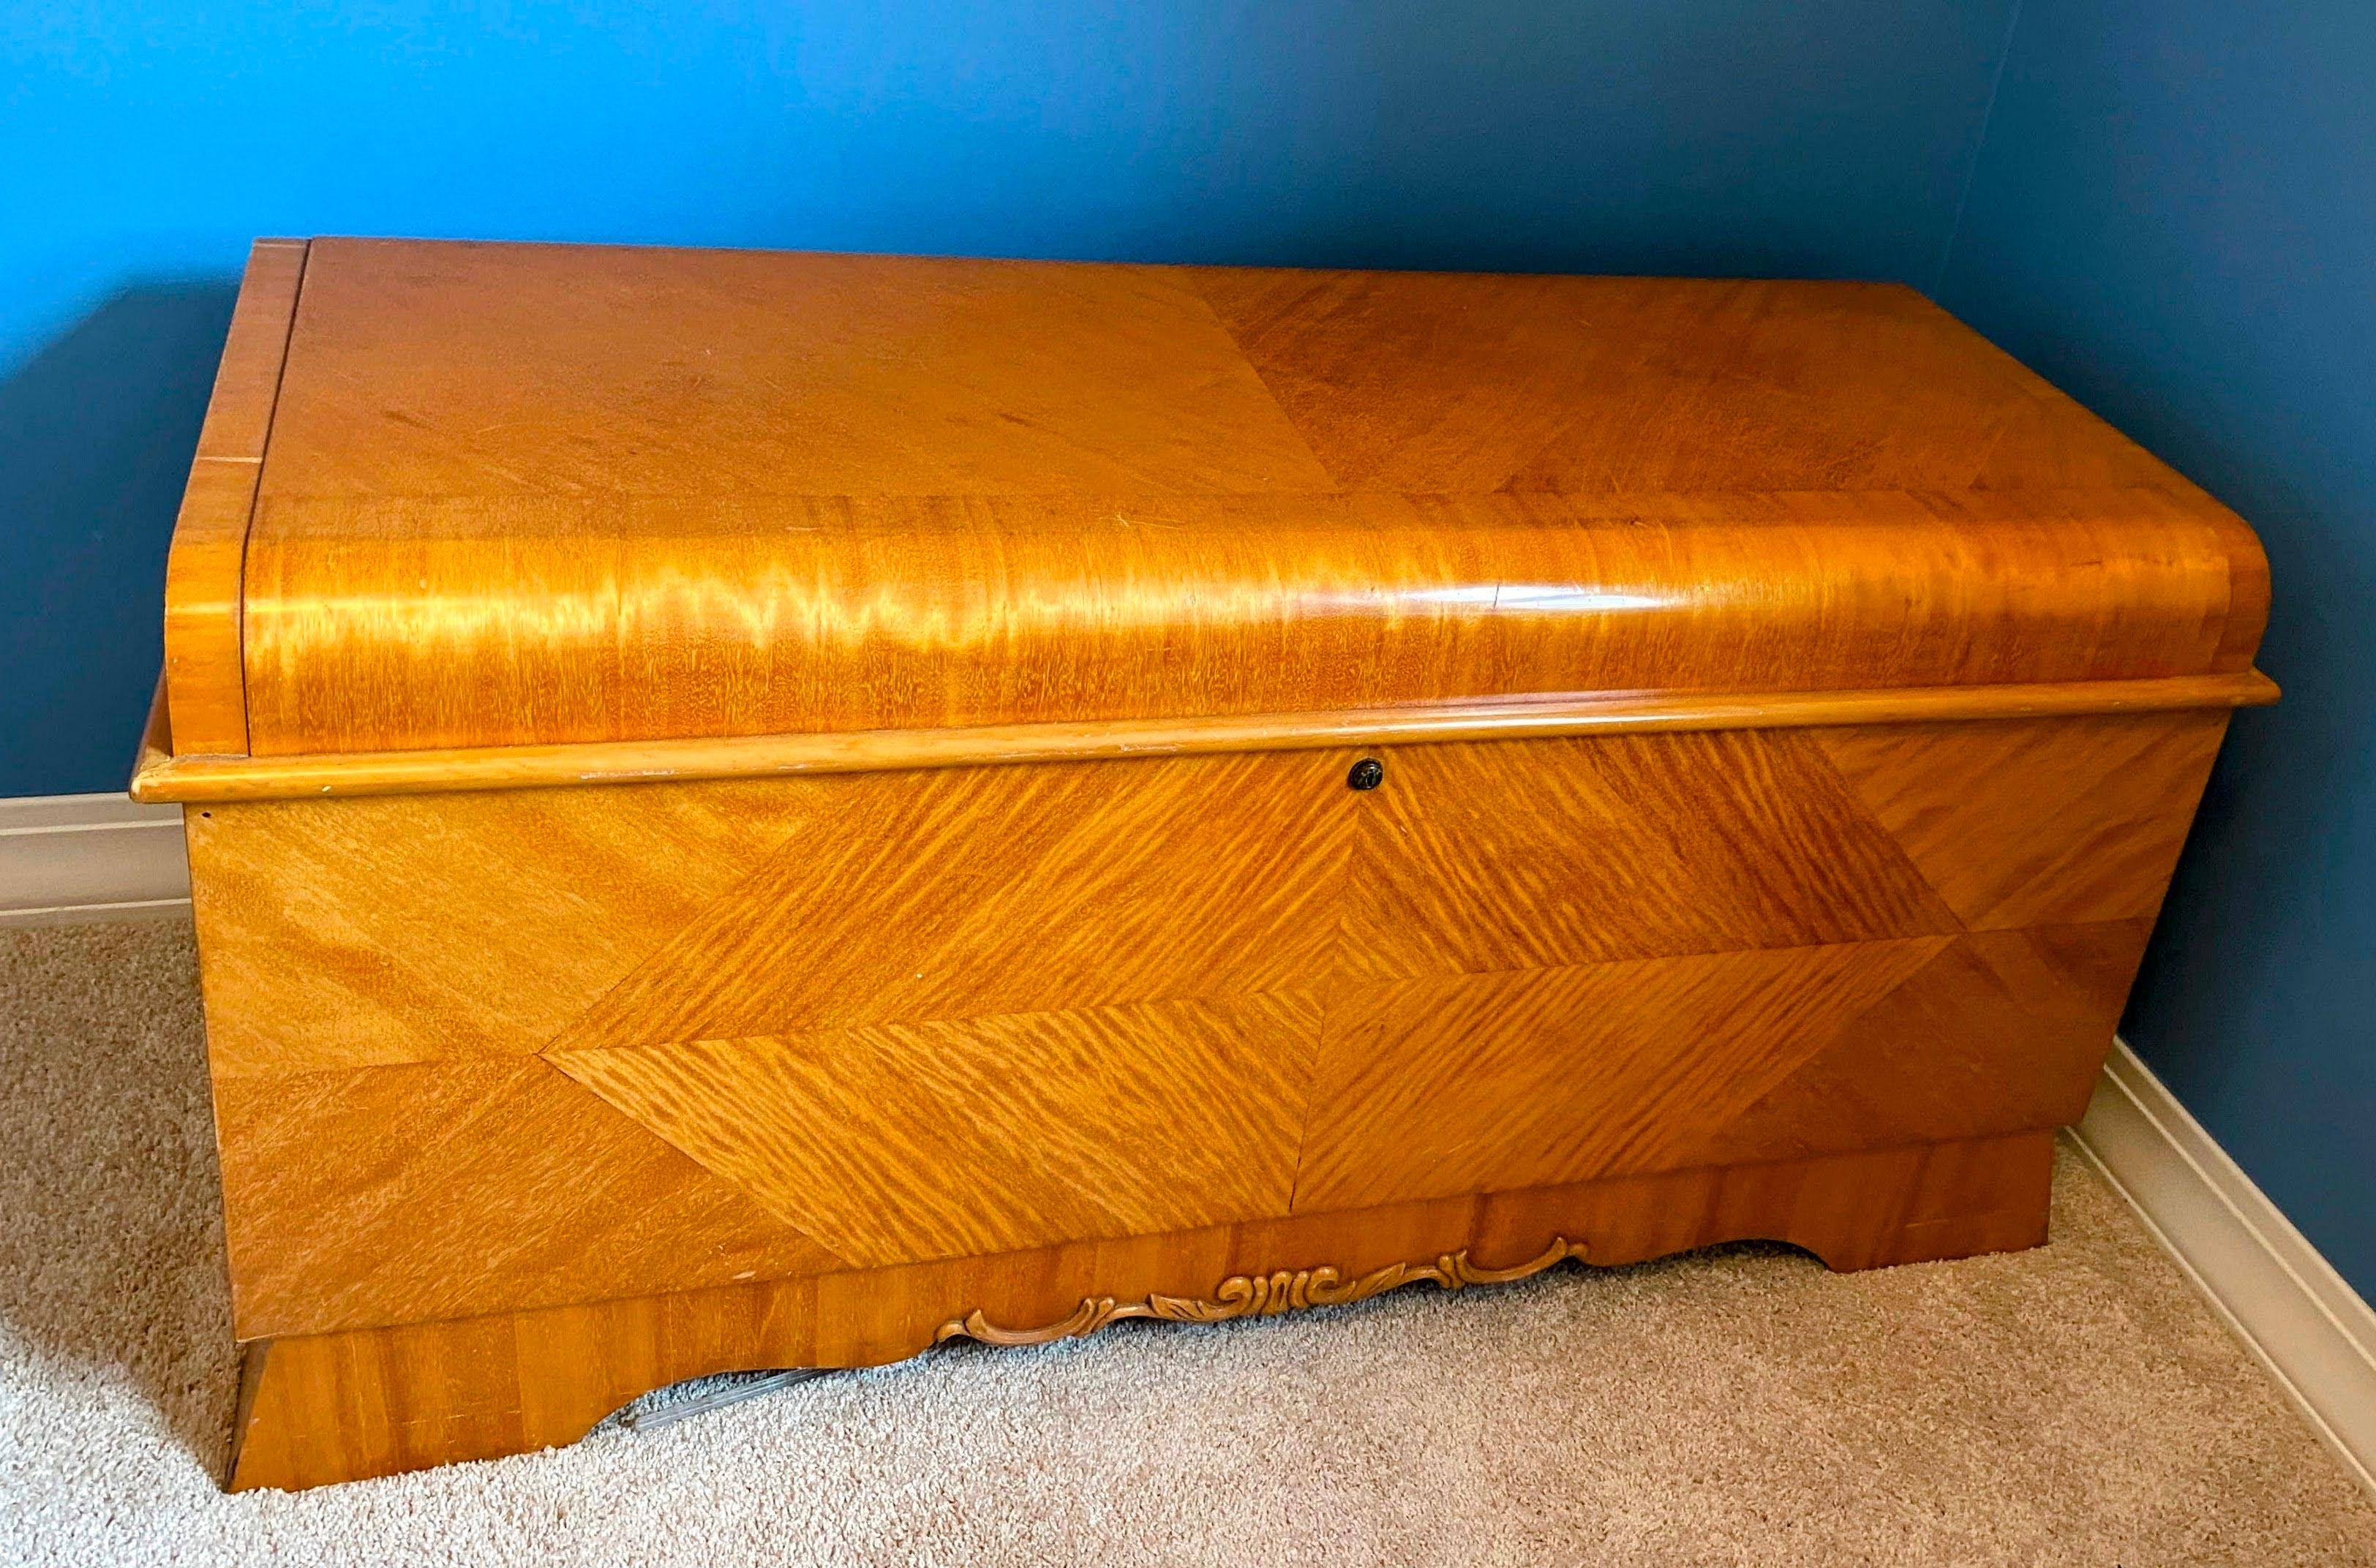 Lane Furniture Waterfall Art Deco Flame Mahogany Cedar Blanket Chest. Lane furniture waterfall Art Deco flame mahogany cedar blanket chest in good vintage condition.

Dimension
47.25